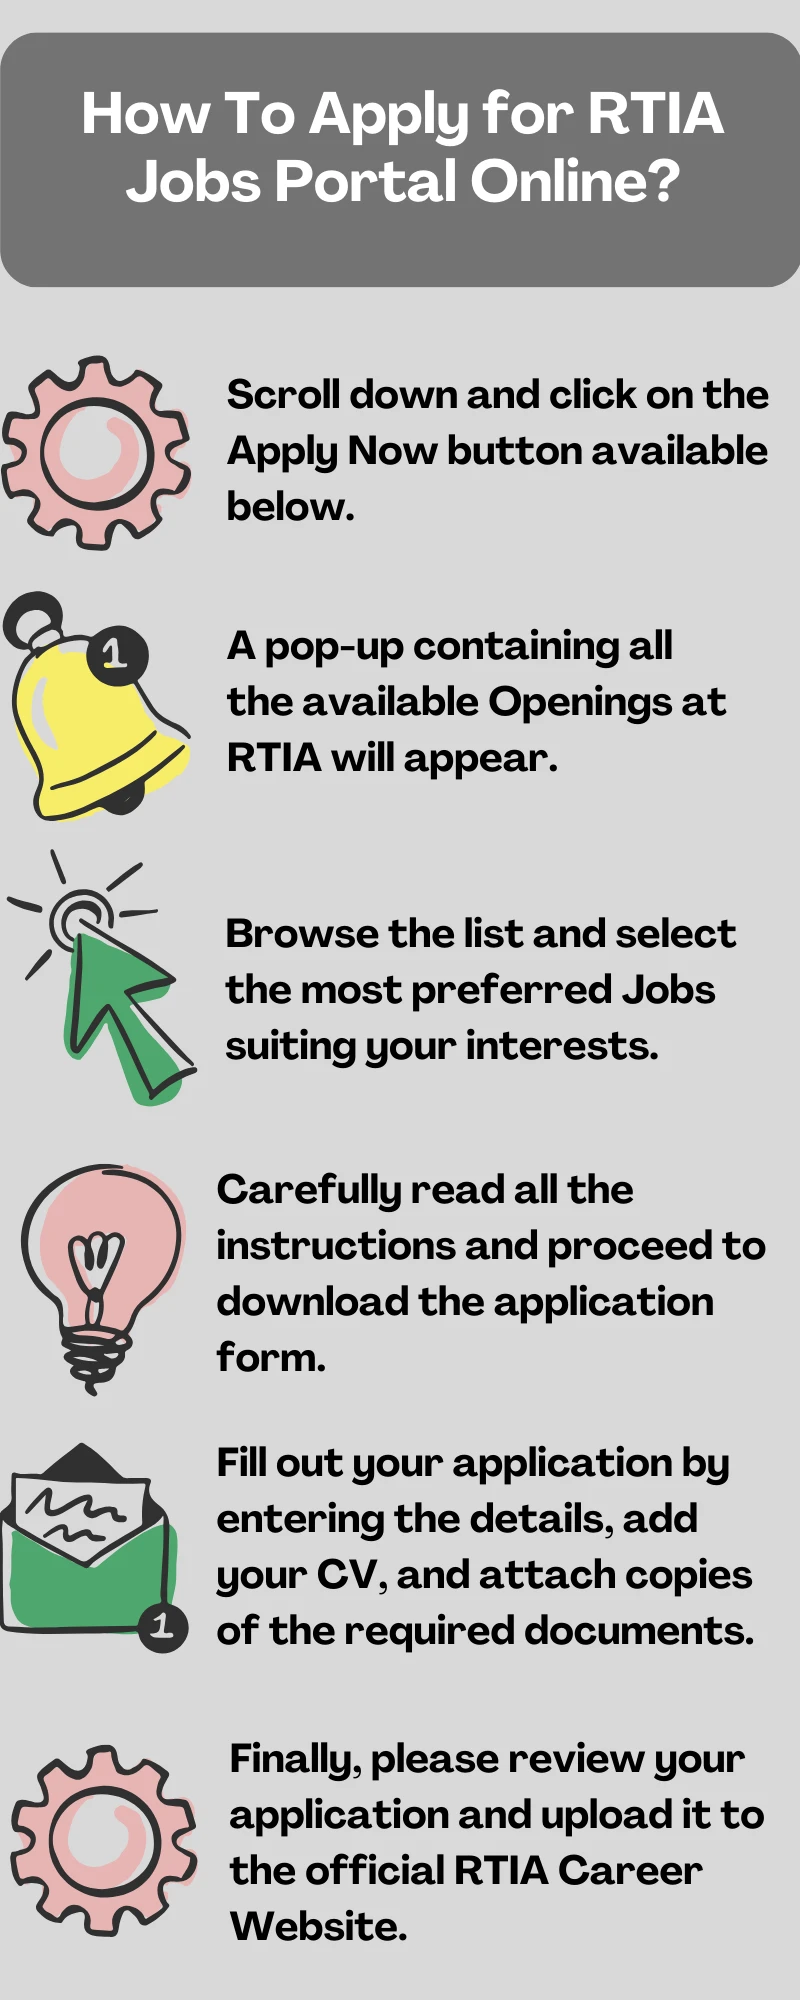 How To Apply for RTIA Jobs Portal Online?